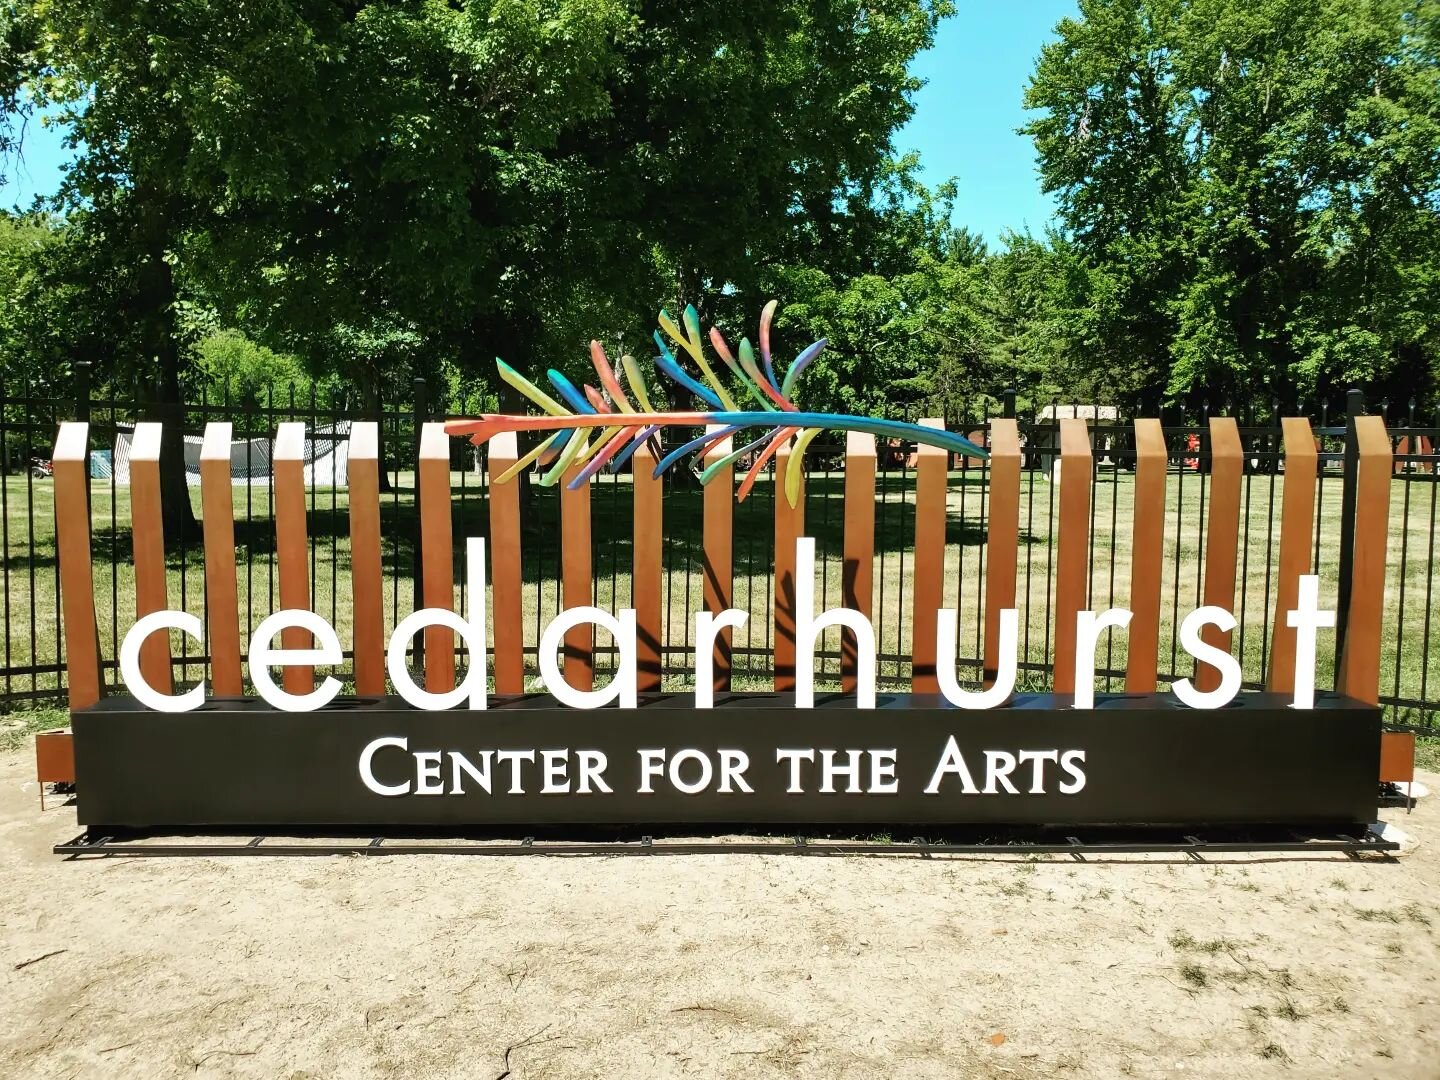 Cedarhurst signage update, last step is lighting and landscaping. I have had such a great time working on this. 

#signage #cedarhurst #fabrication #welding #sign #southernillinois #blacksmith #forge #metalwork #metal #corten #steel #design